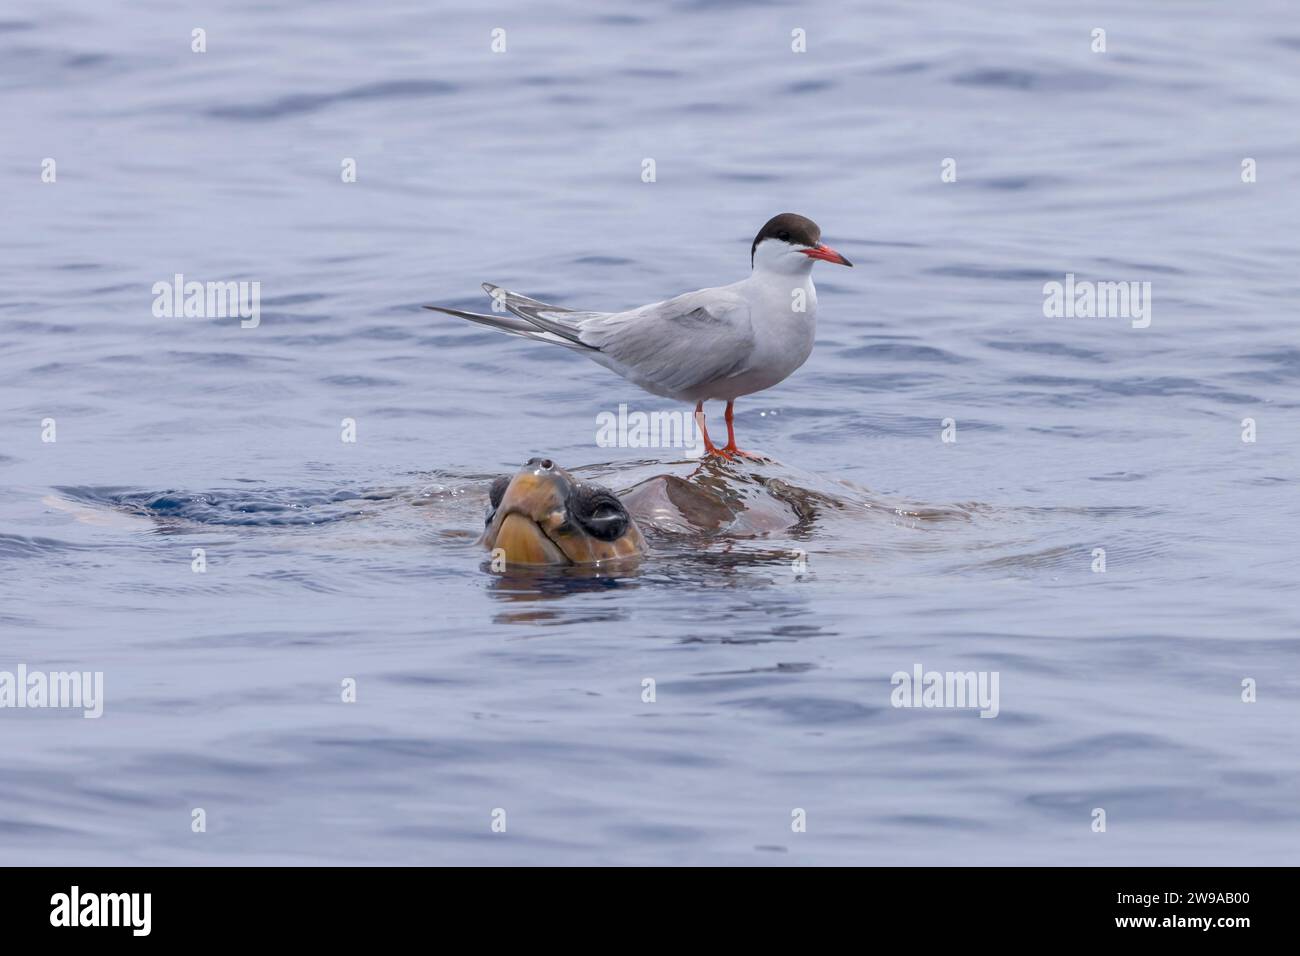 Actic Tern (Sterna paradisaea) riding on a Loggerhead Sea Turtle (Caretta caretta), viewed from a whale watching boat, Azores, Portugal Stock Photo